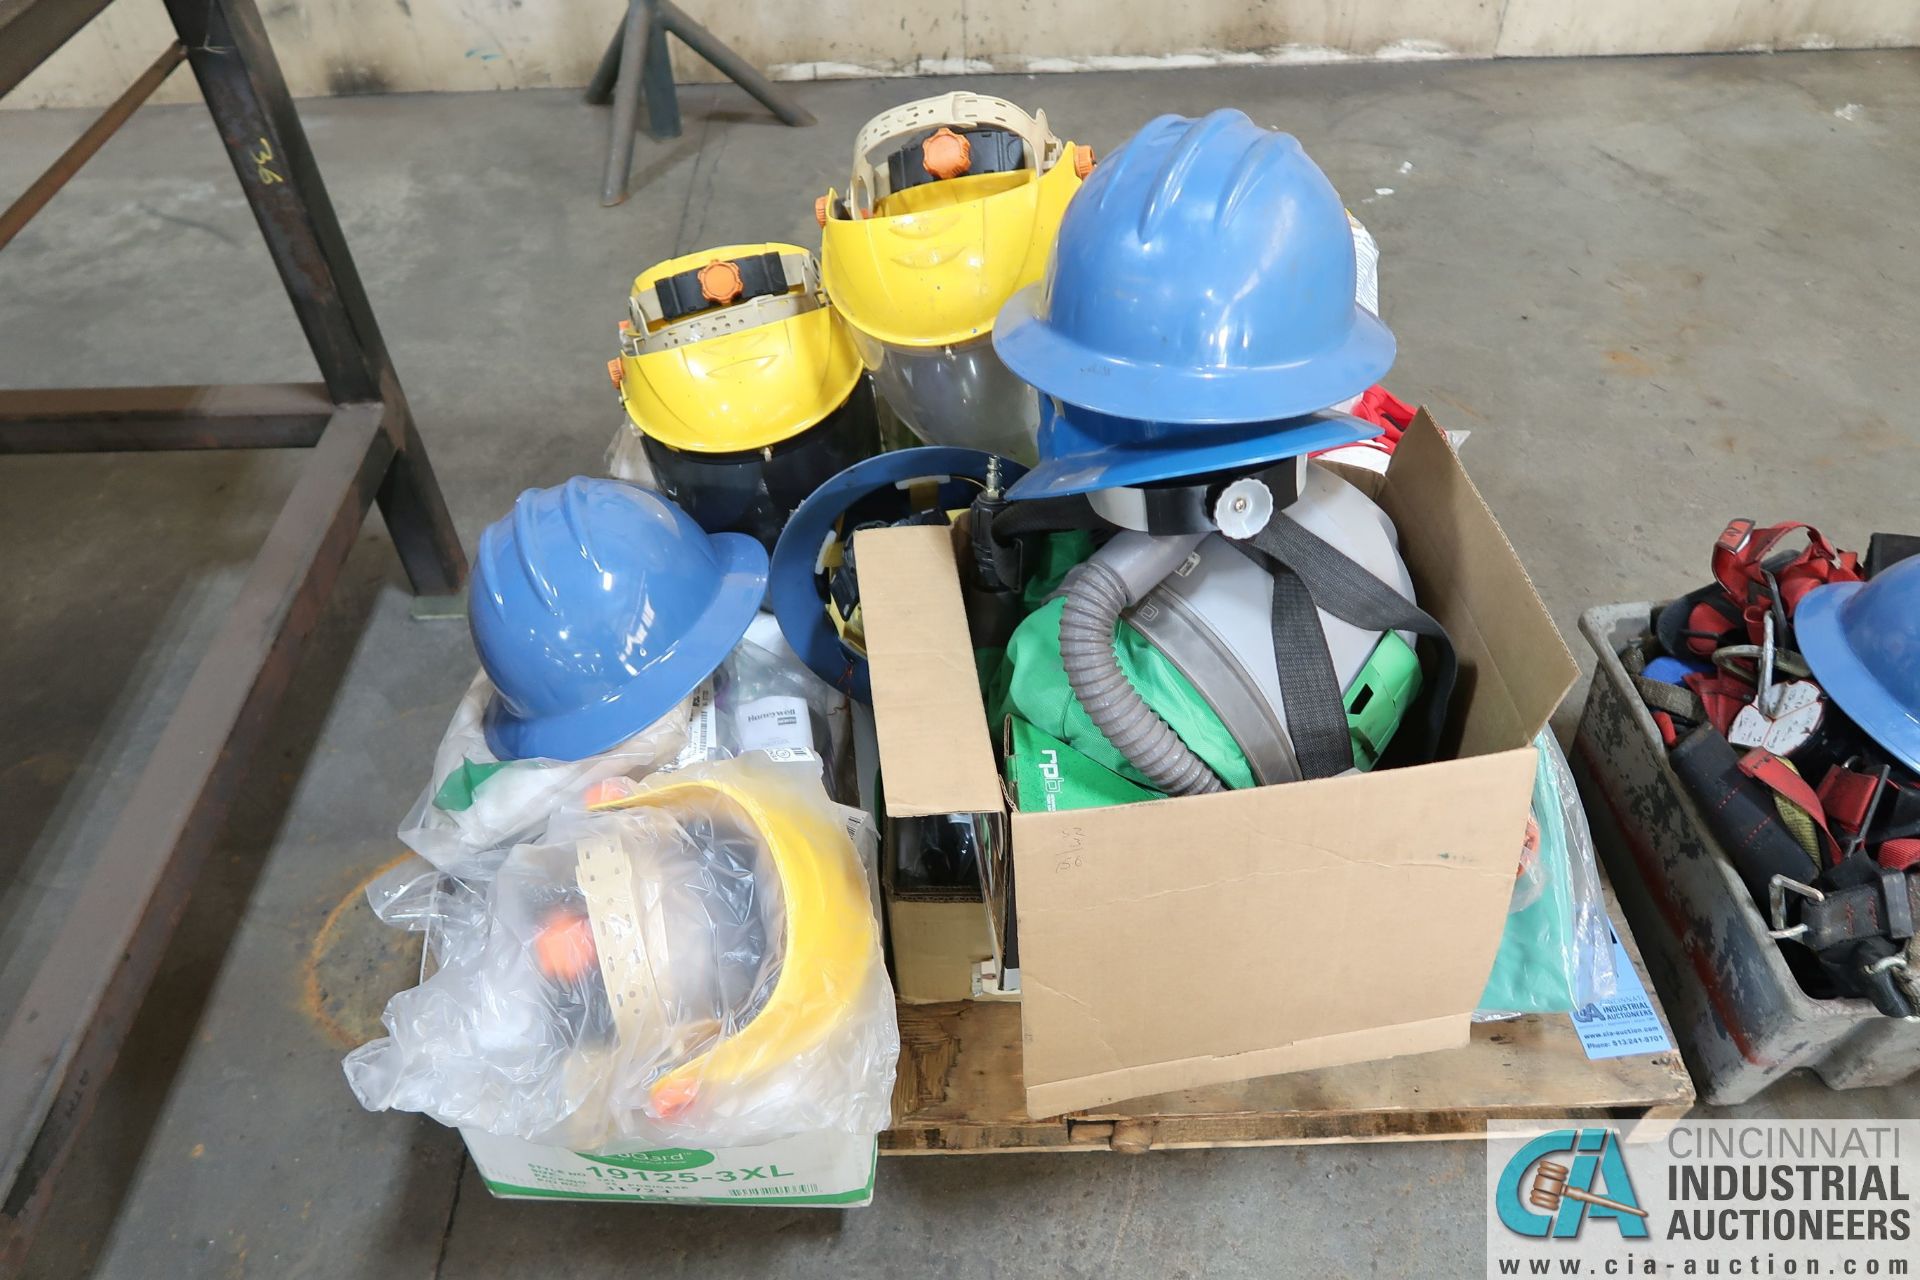 (LOT) MISCELLANEOUS SAFETY GEAR INCLUDING HELMETS, GLOVES, JACKETS, CLEAN SUITS, HARNESSES